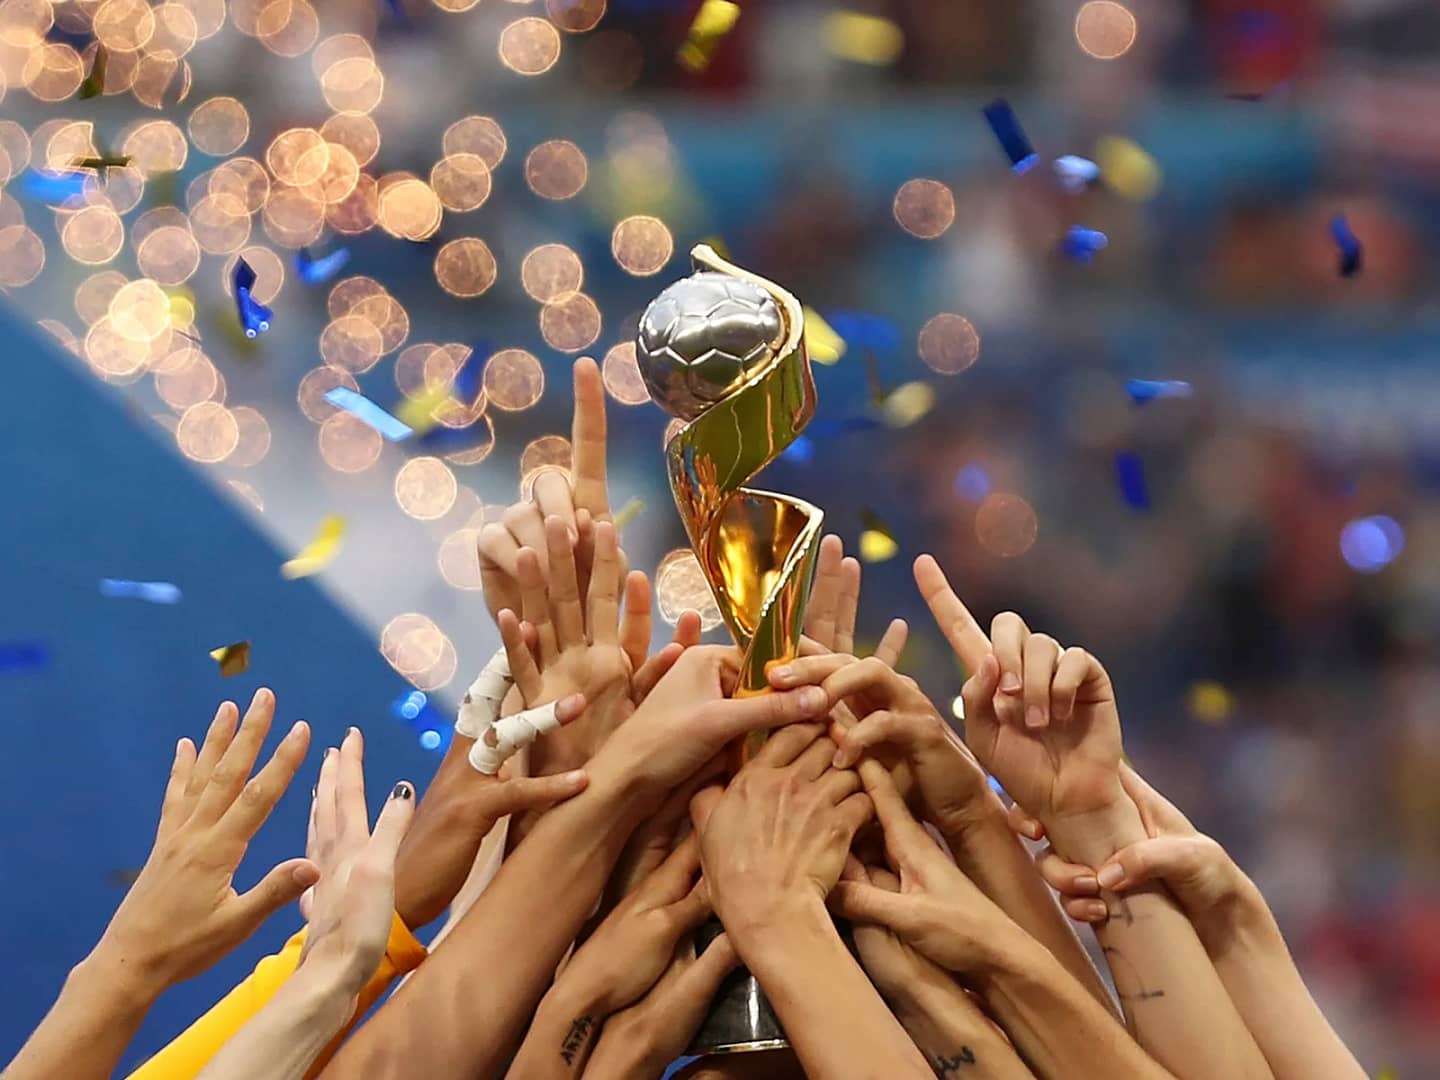 Record-Breaking Viewership: Women's World Cup Dominates as Most-Watched Show